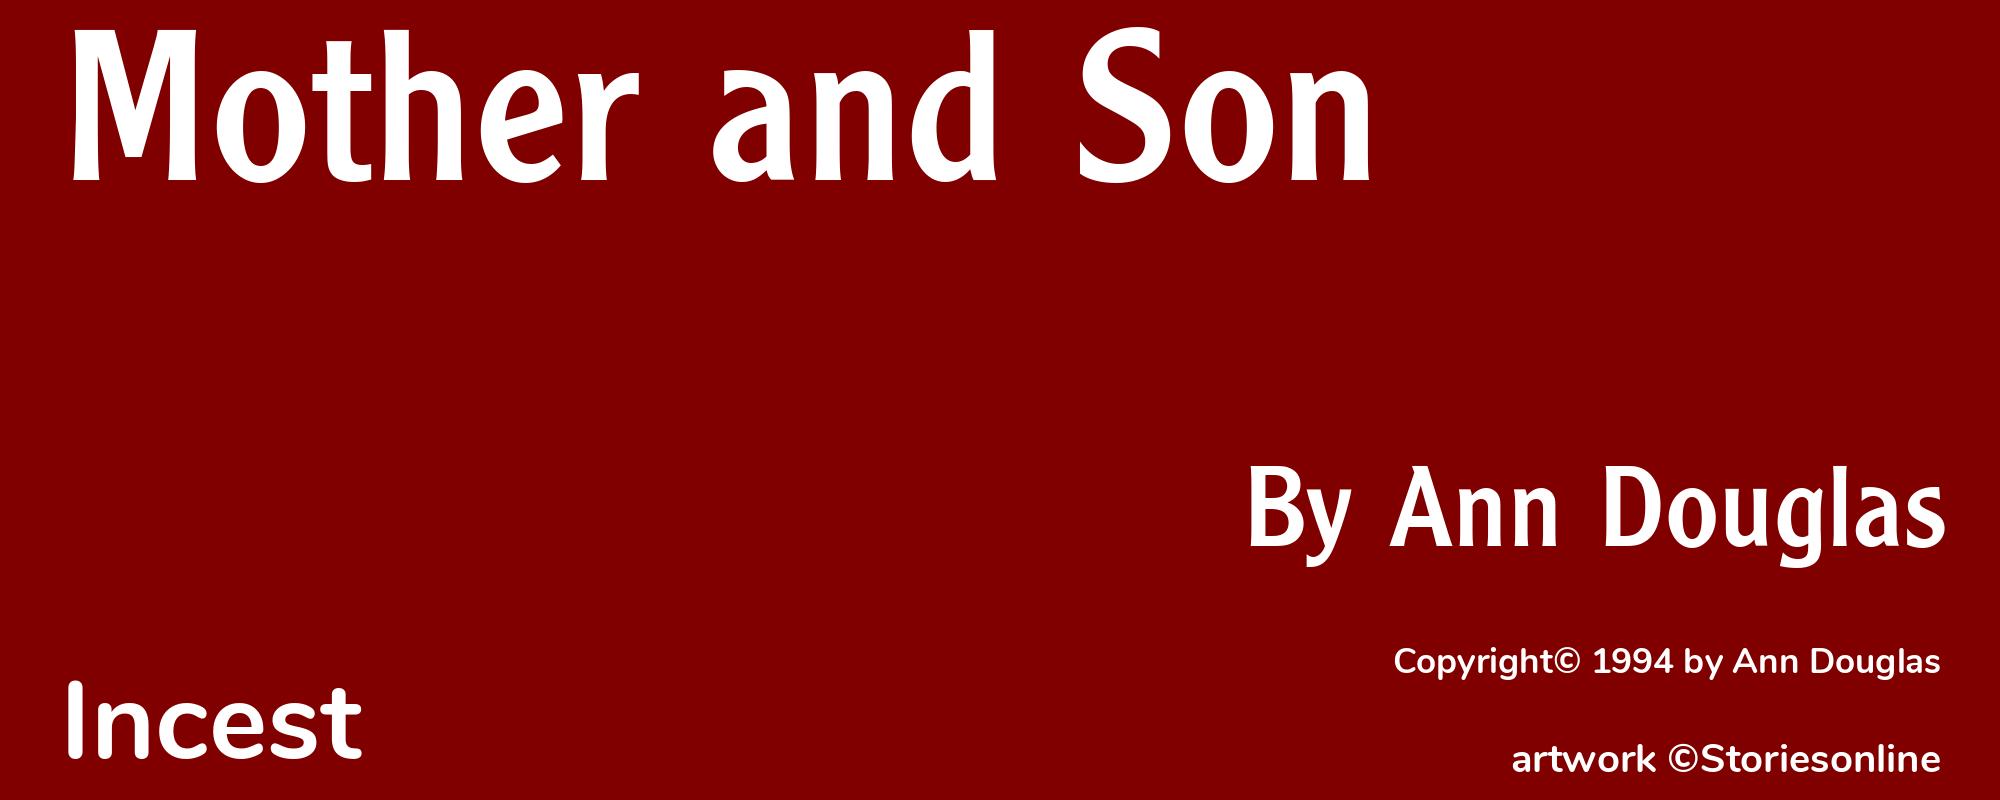 Mother and Son - Cover